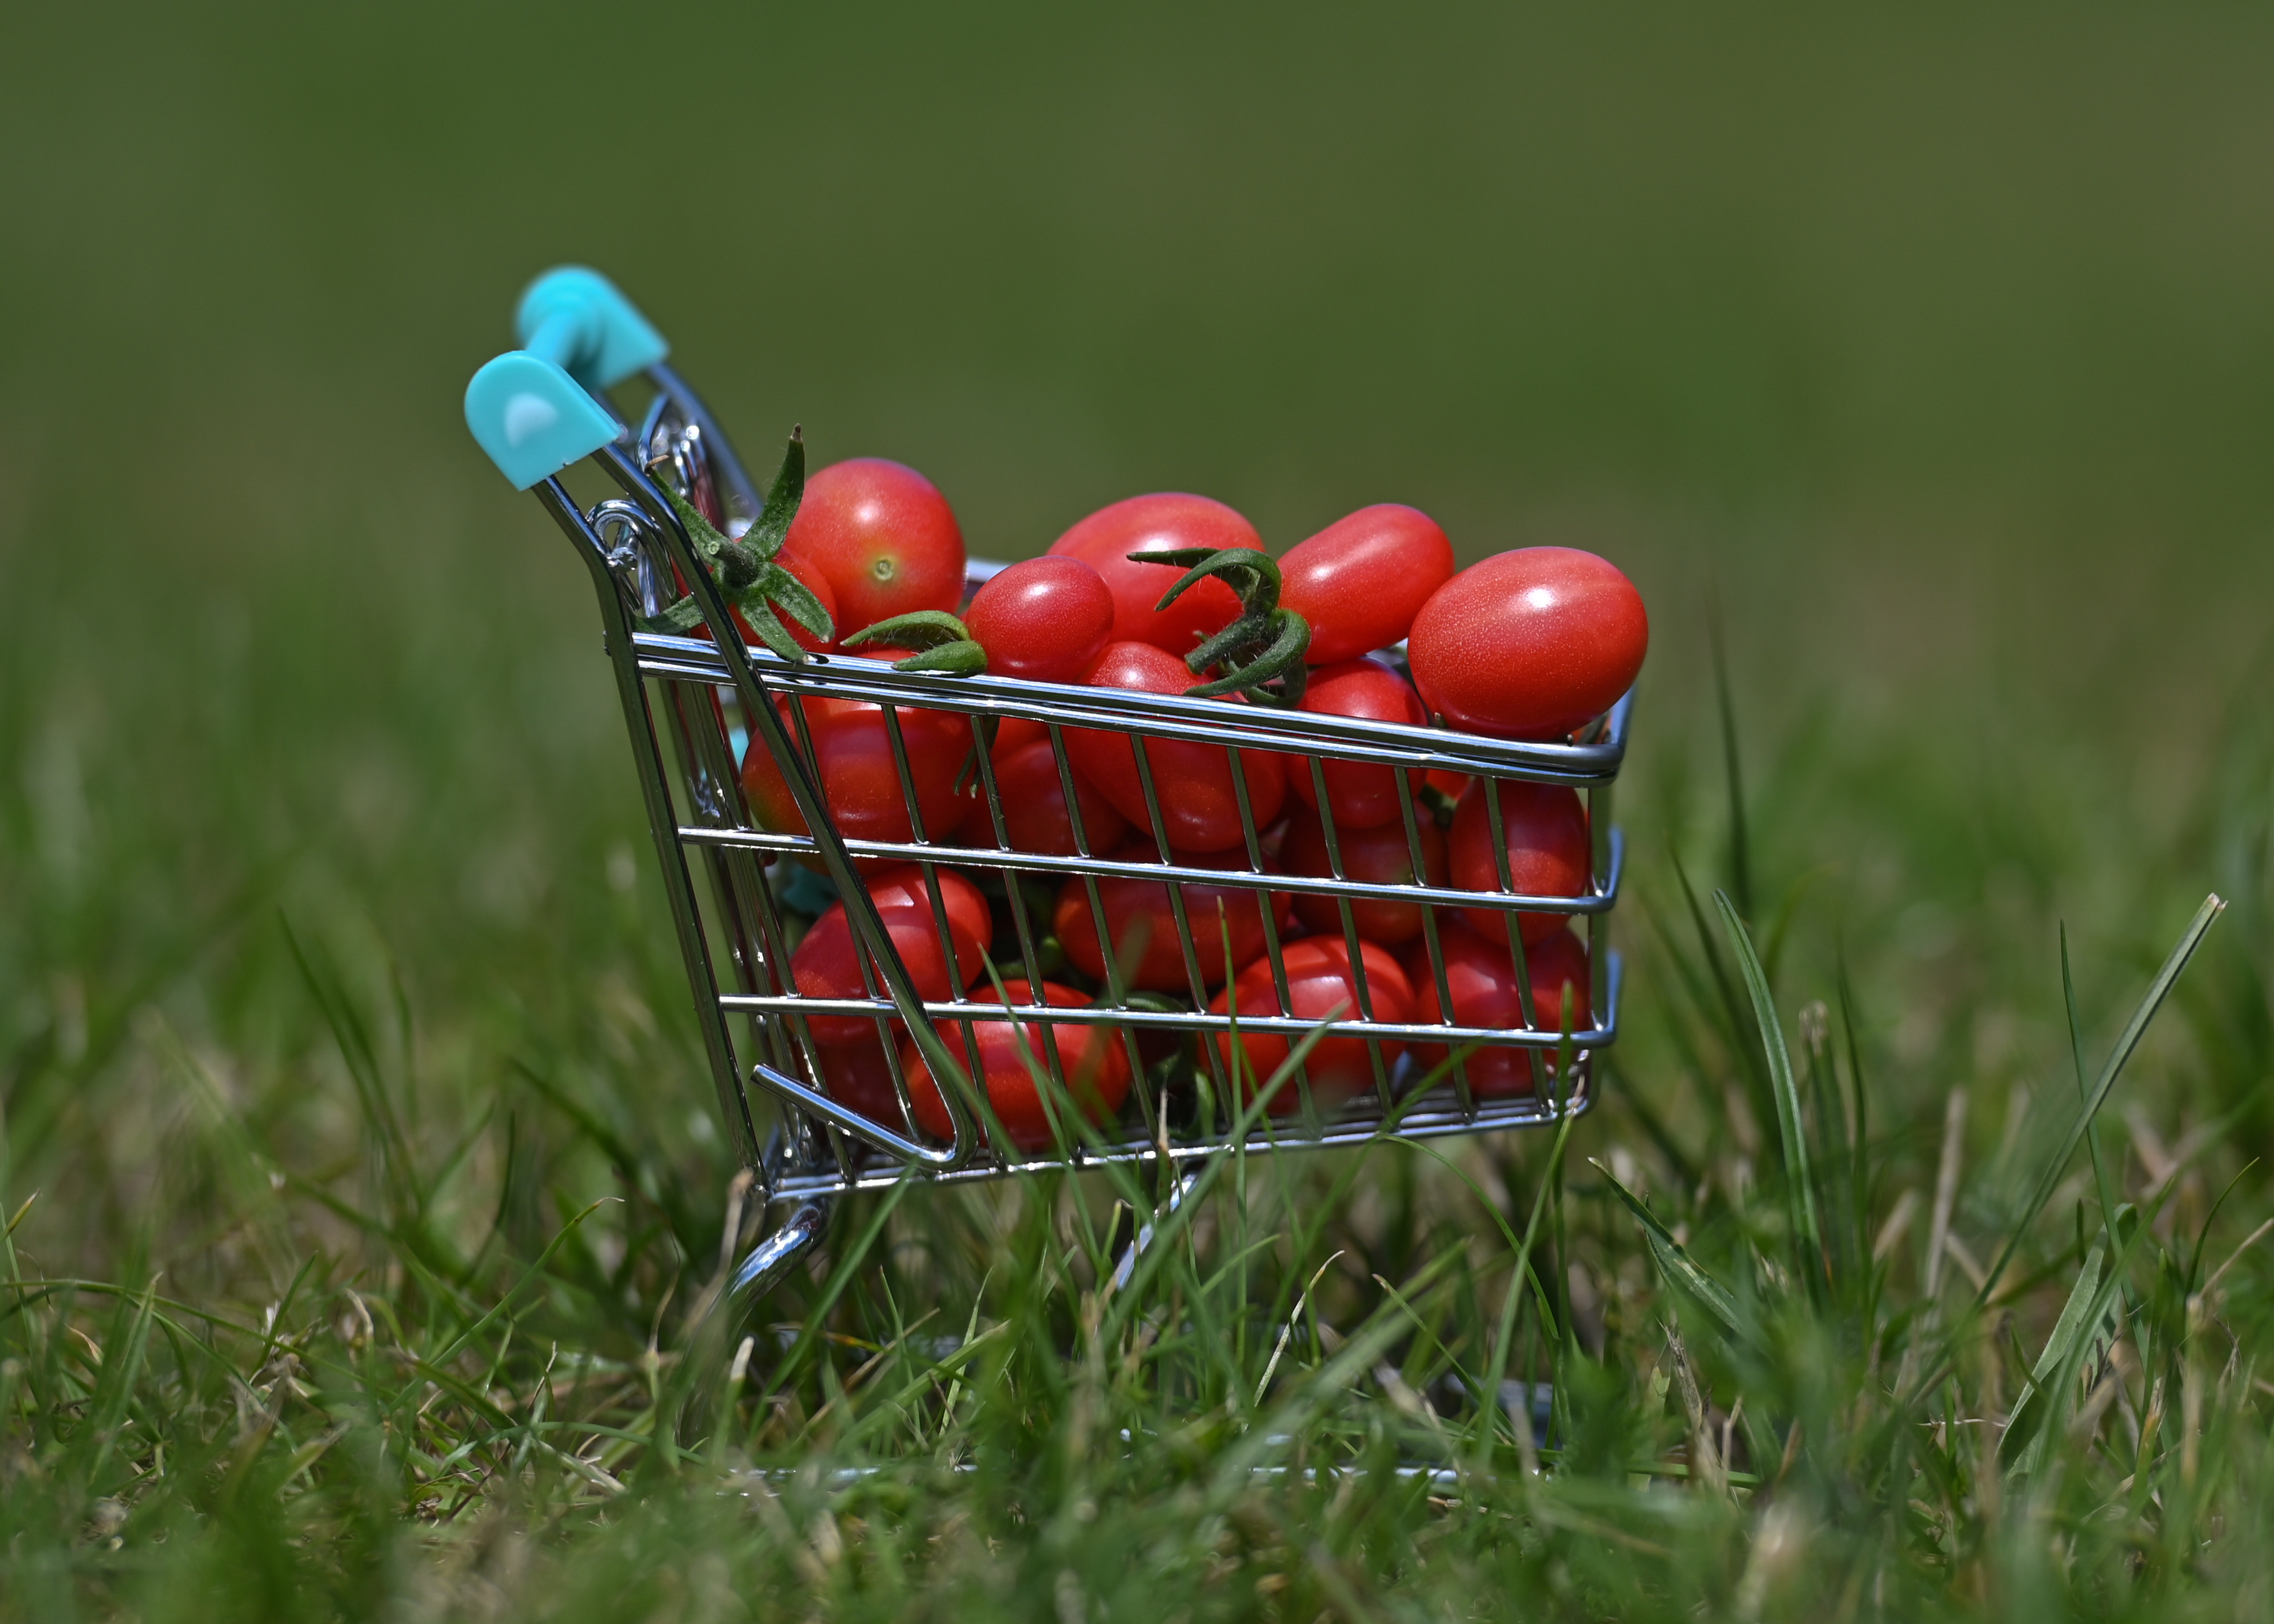 Cherry Roma tomatoes seen in a mini shopping cart parked on a green lawn.